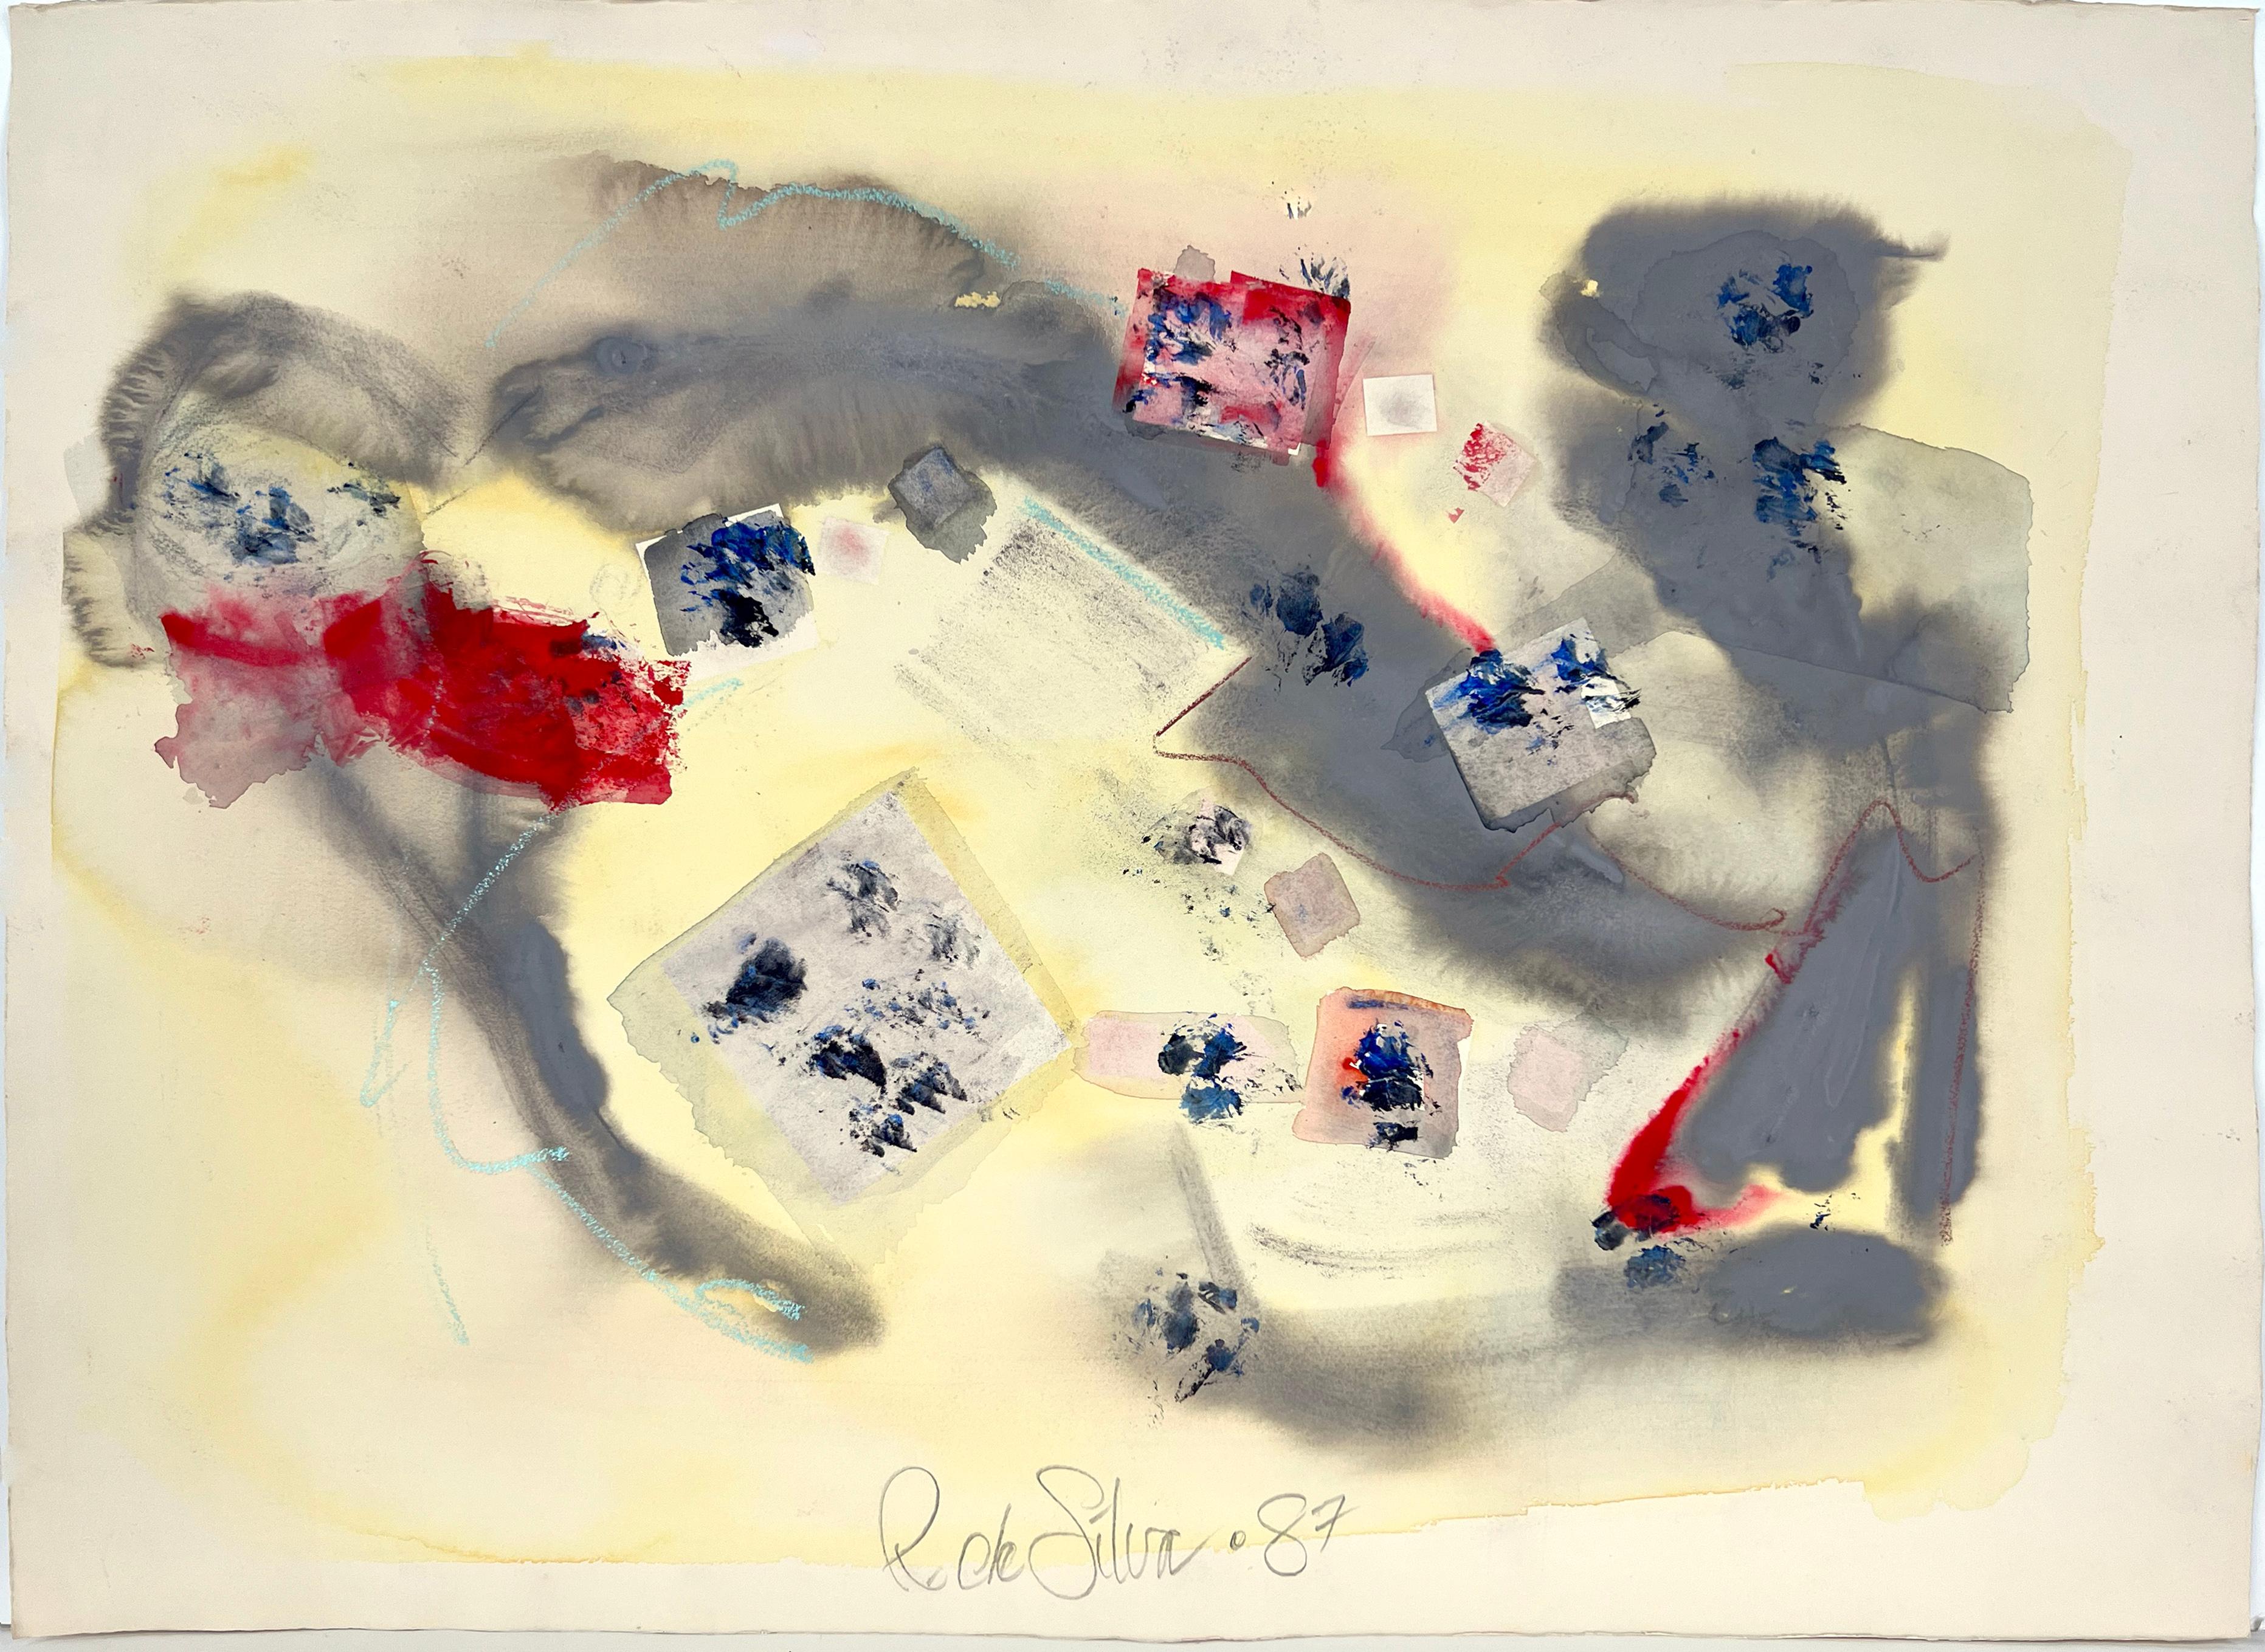 Ricardo de Silva Abstract Painting - Figures at work or Play Abstraction Watercolor and Acrylic on Paper